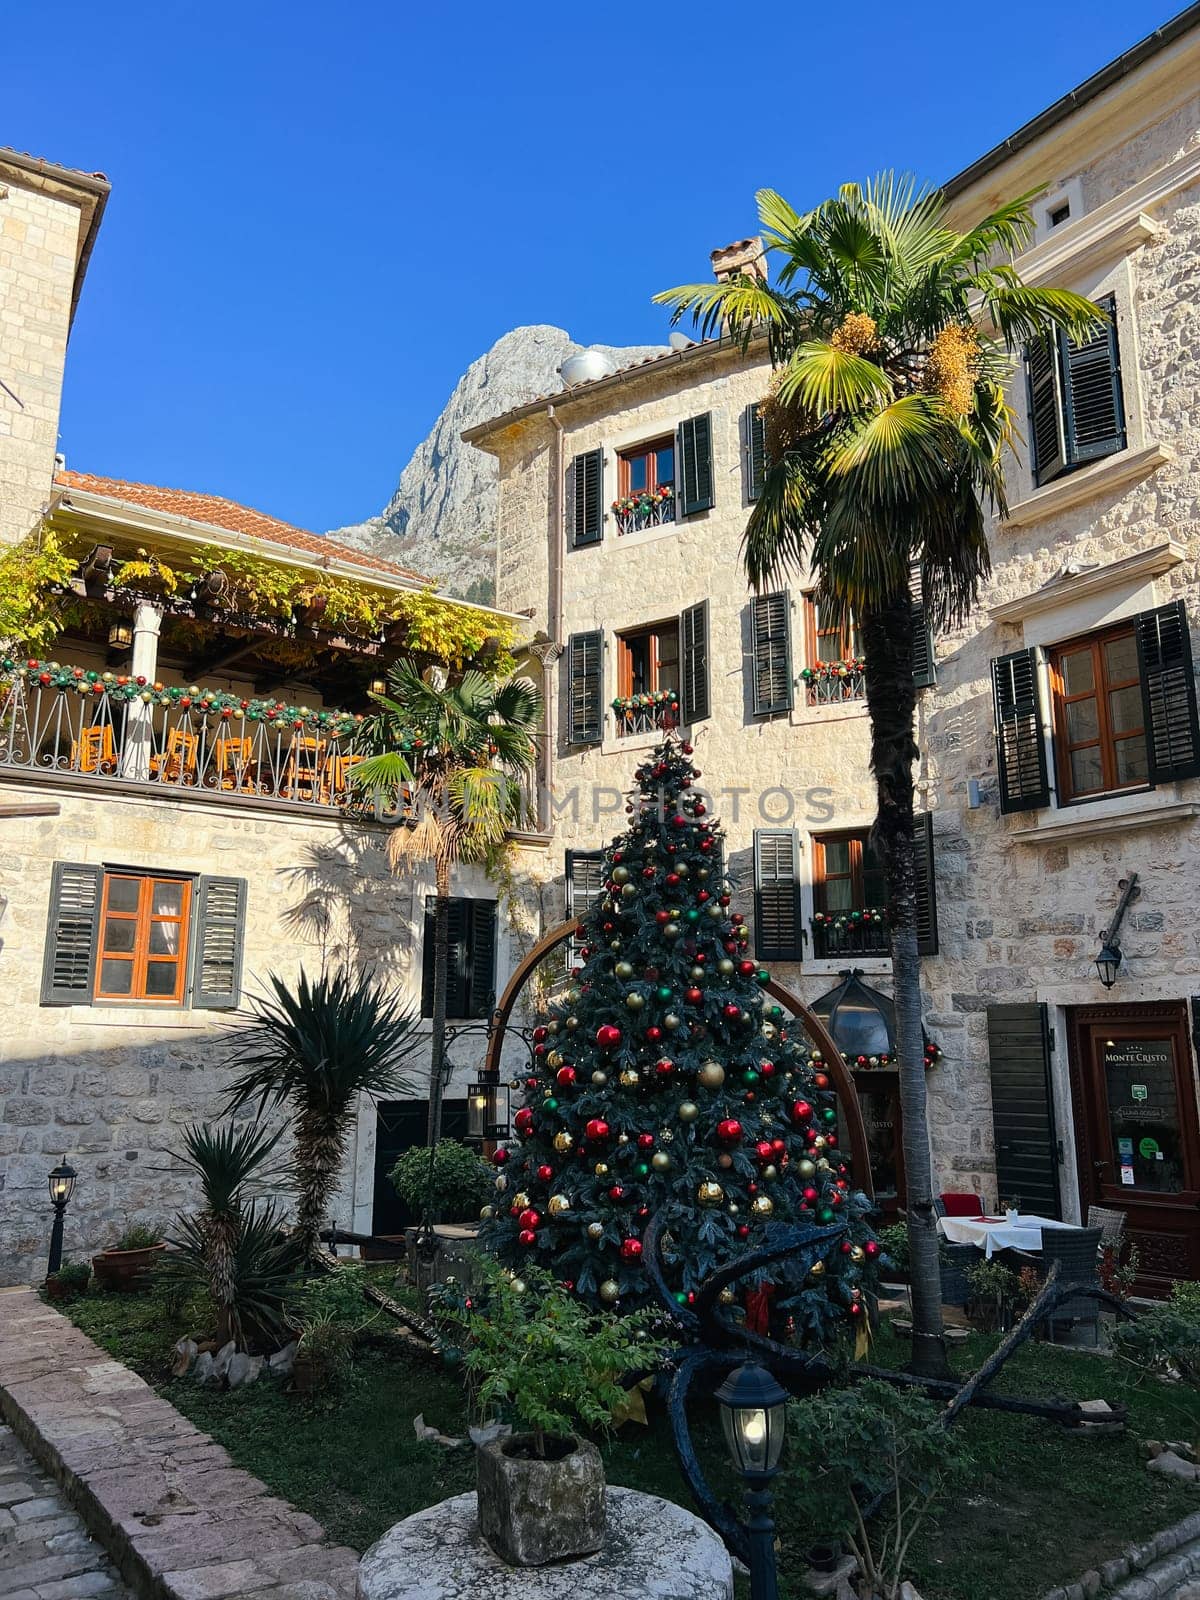 Decorated Christmas tree in the courtyard of an old stone house among palm trees. High quality photo